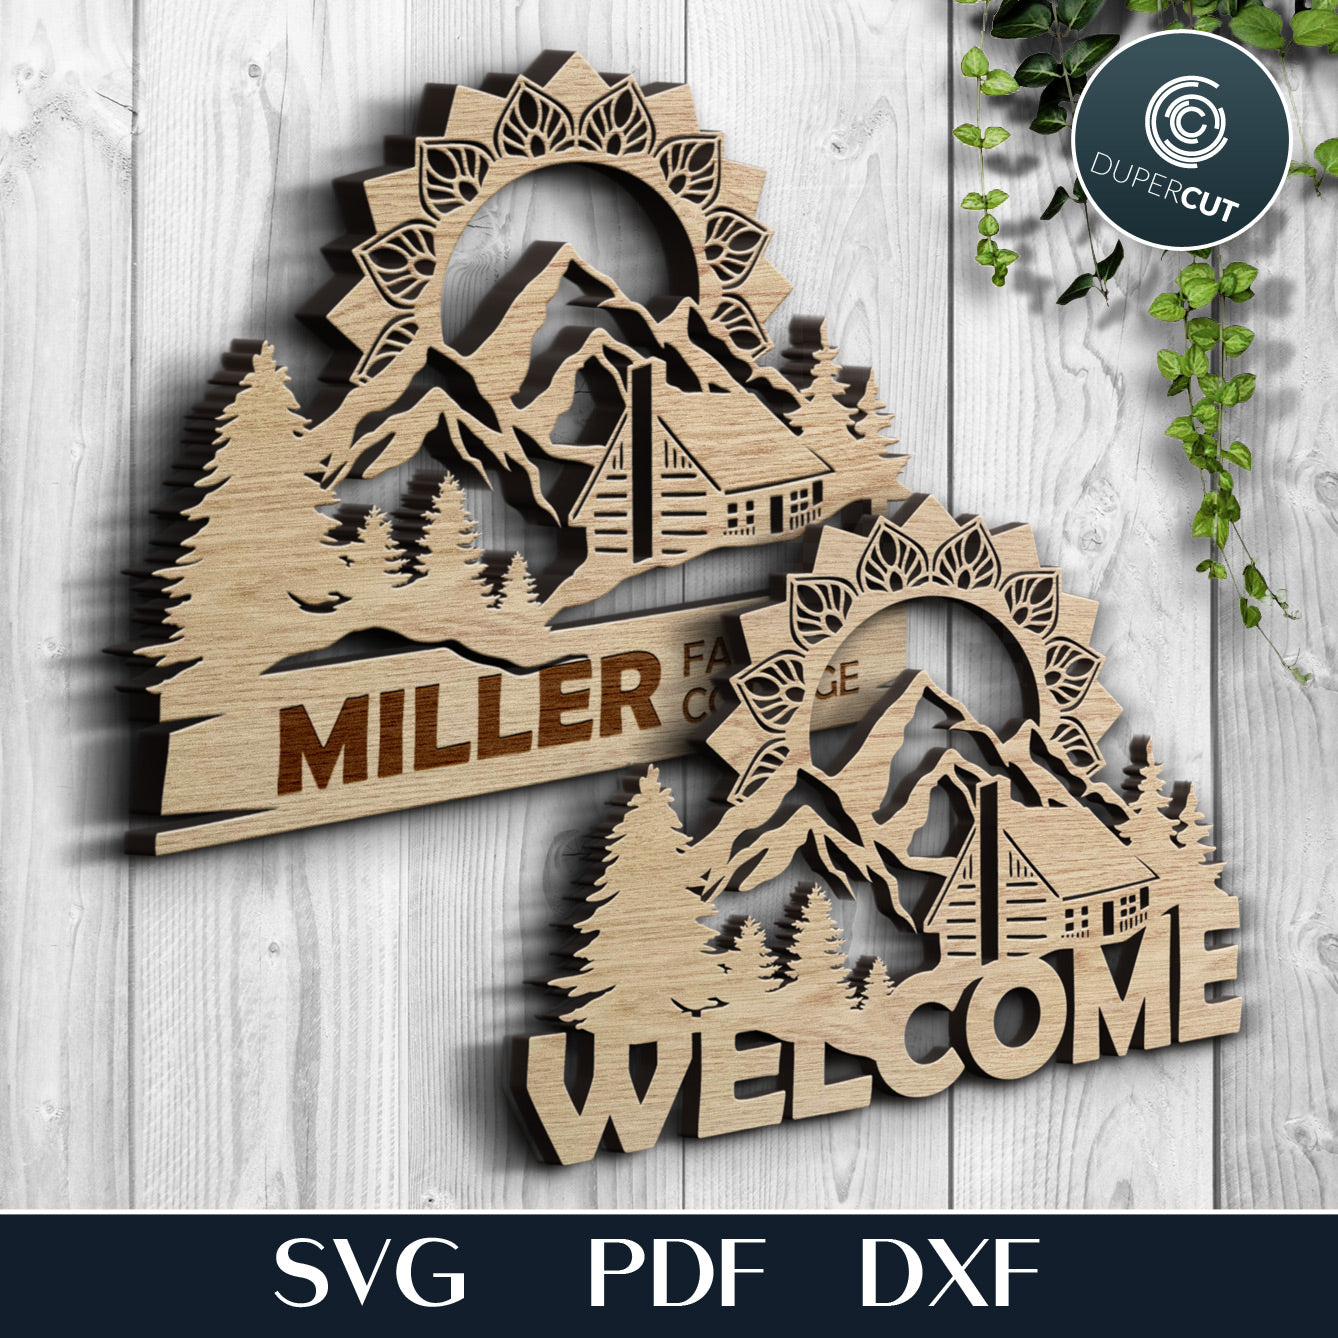 Mandala cabin welcome sign with editable text  - layered laser cutting files SVG PDF DXF templates for commercial use. Glowforge, Cricut, Silhouette Cameo, CNC plasma machines